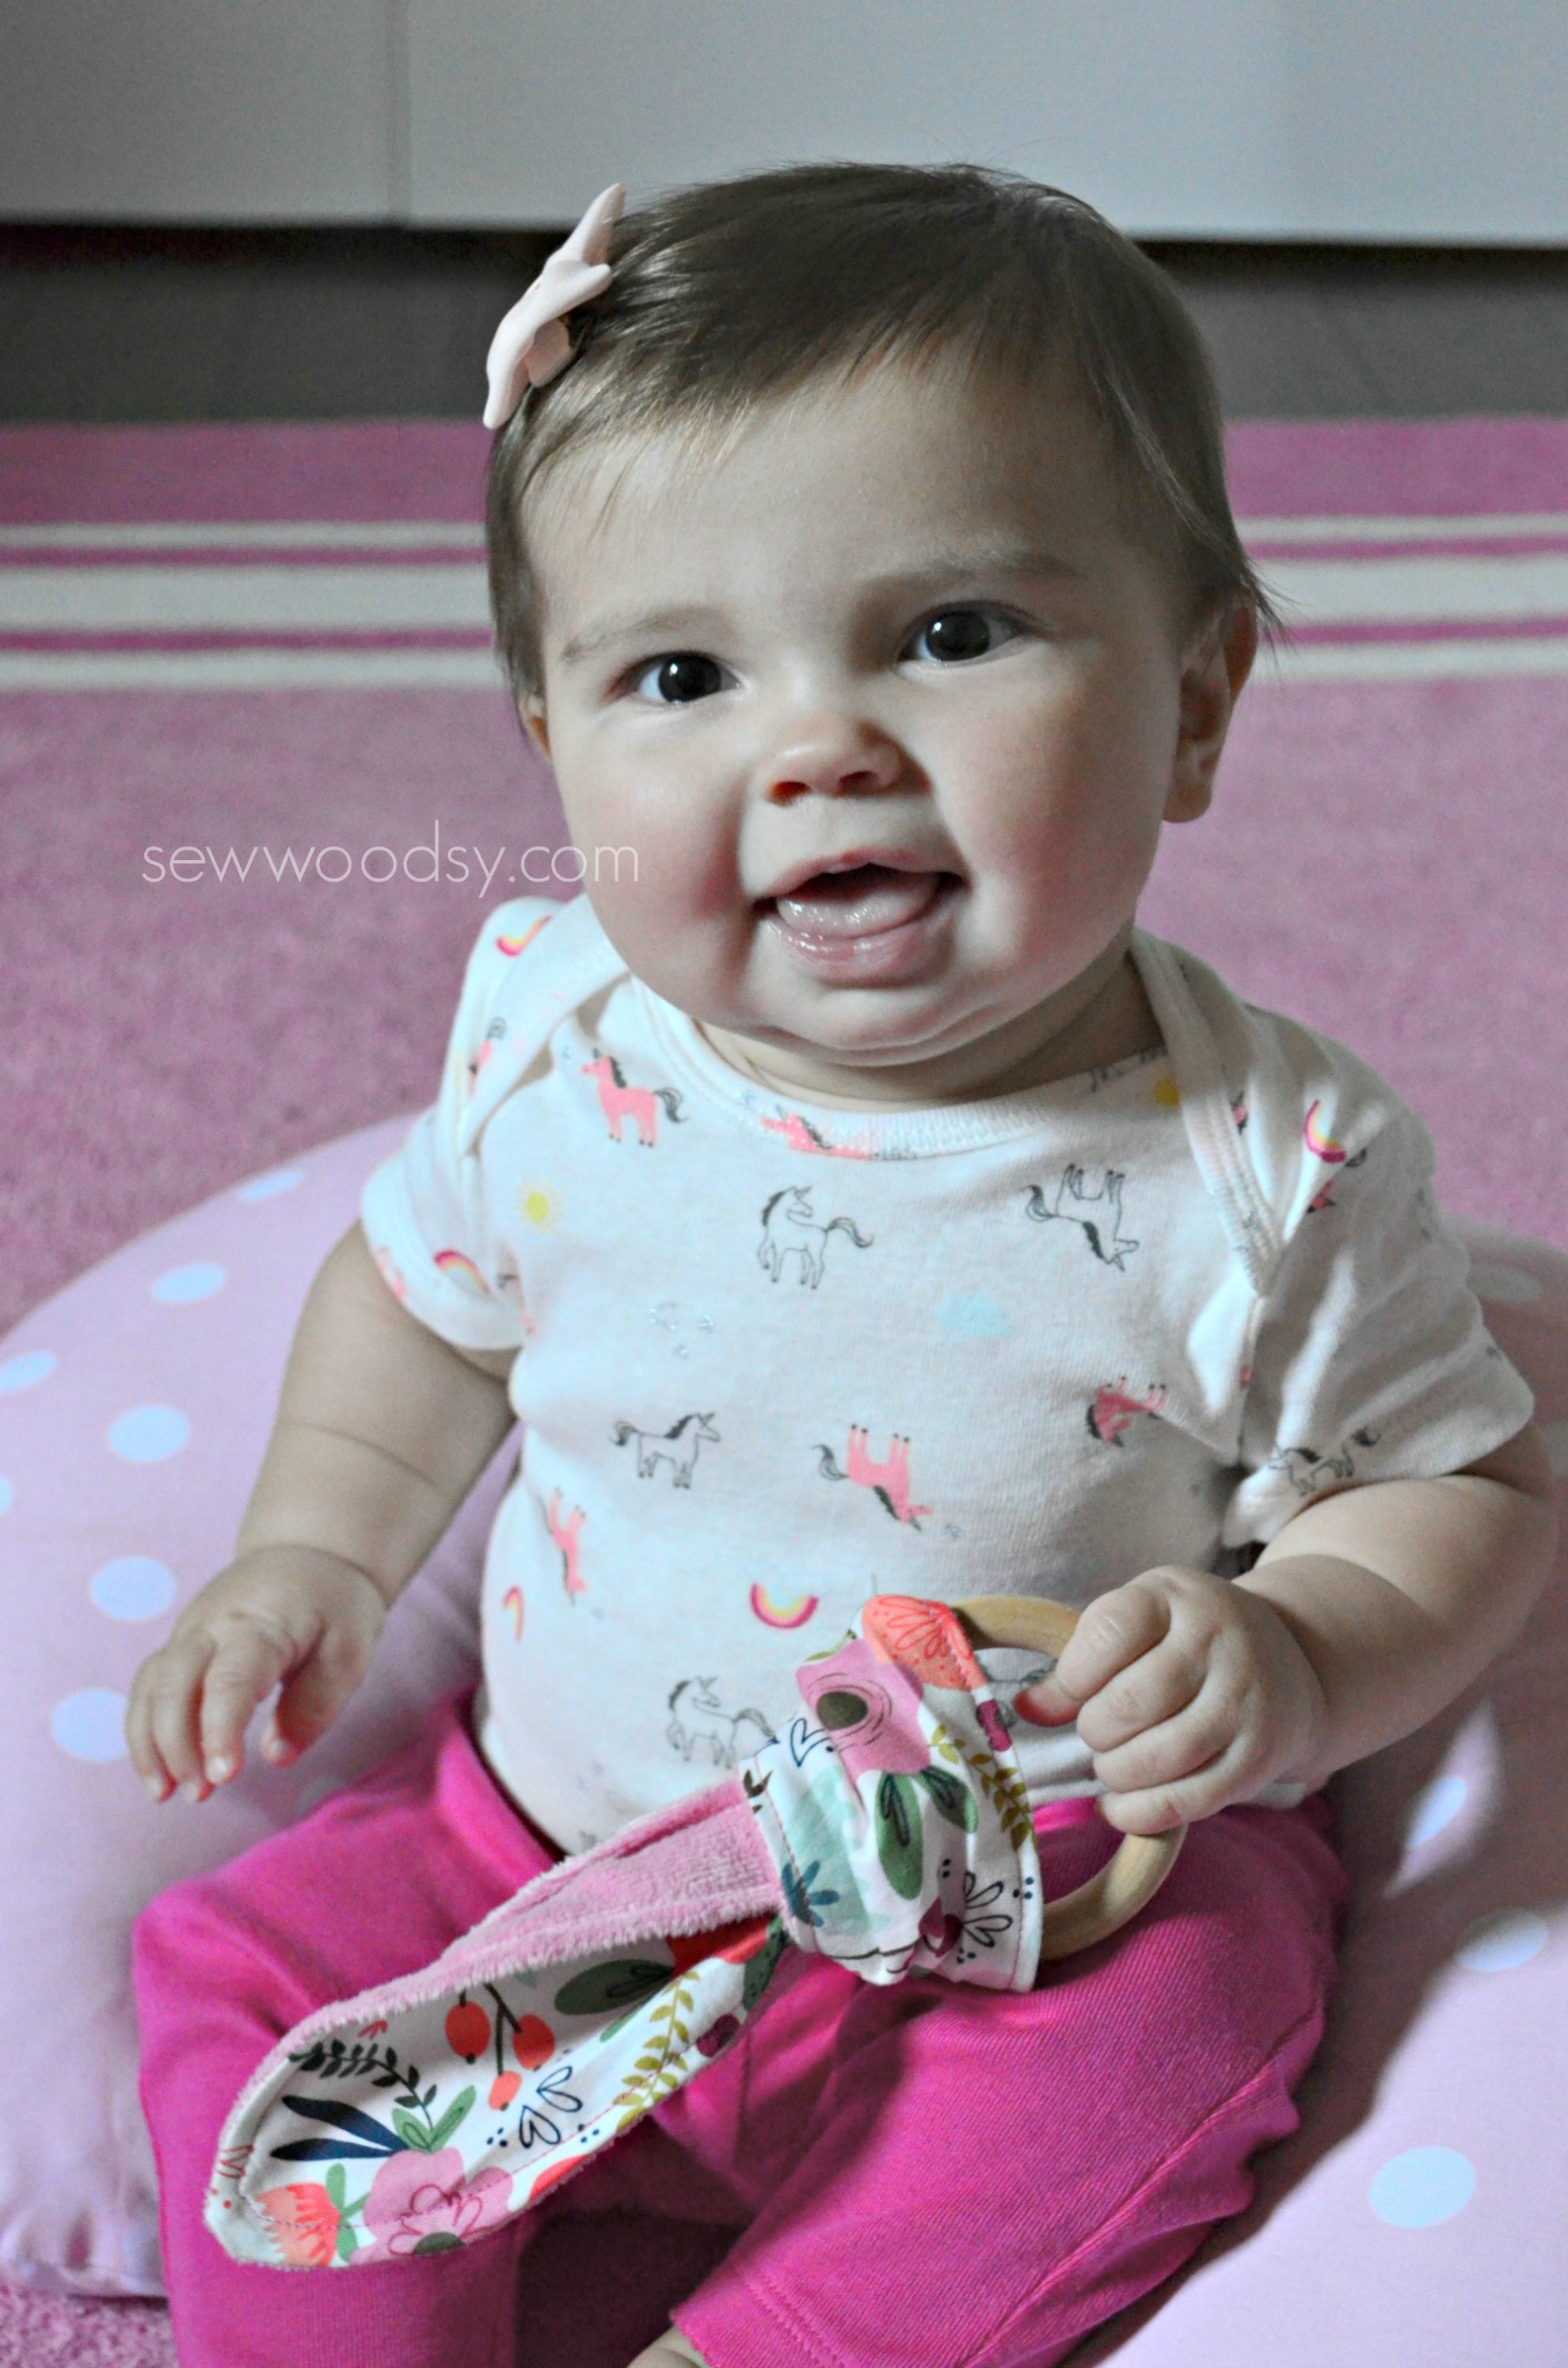 Baby girl holding a wooden teething ring with fabric.